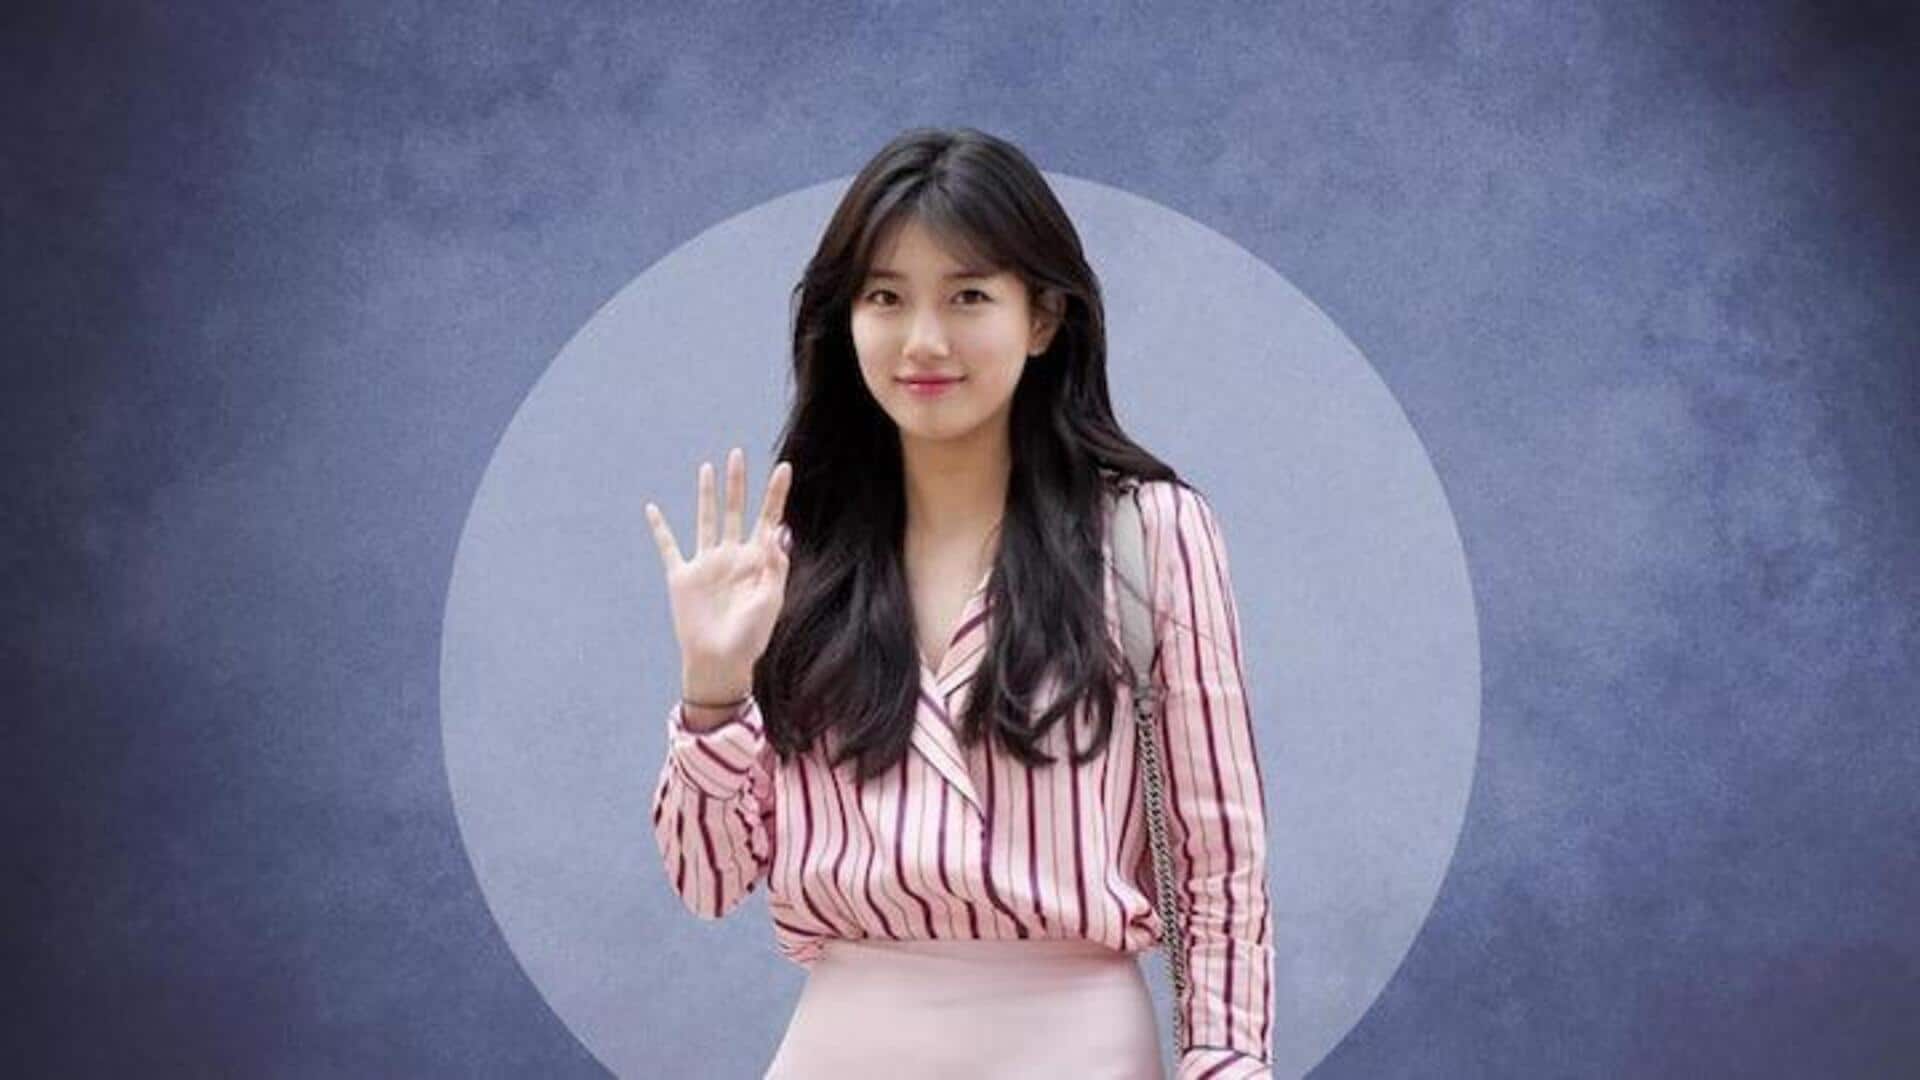 Bae Suzy in talks for role in upcoming romance film